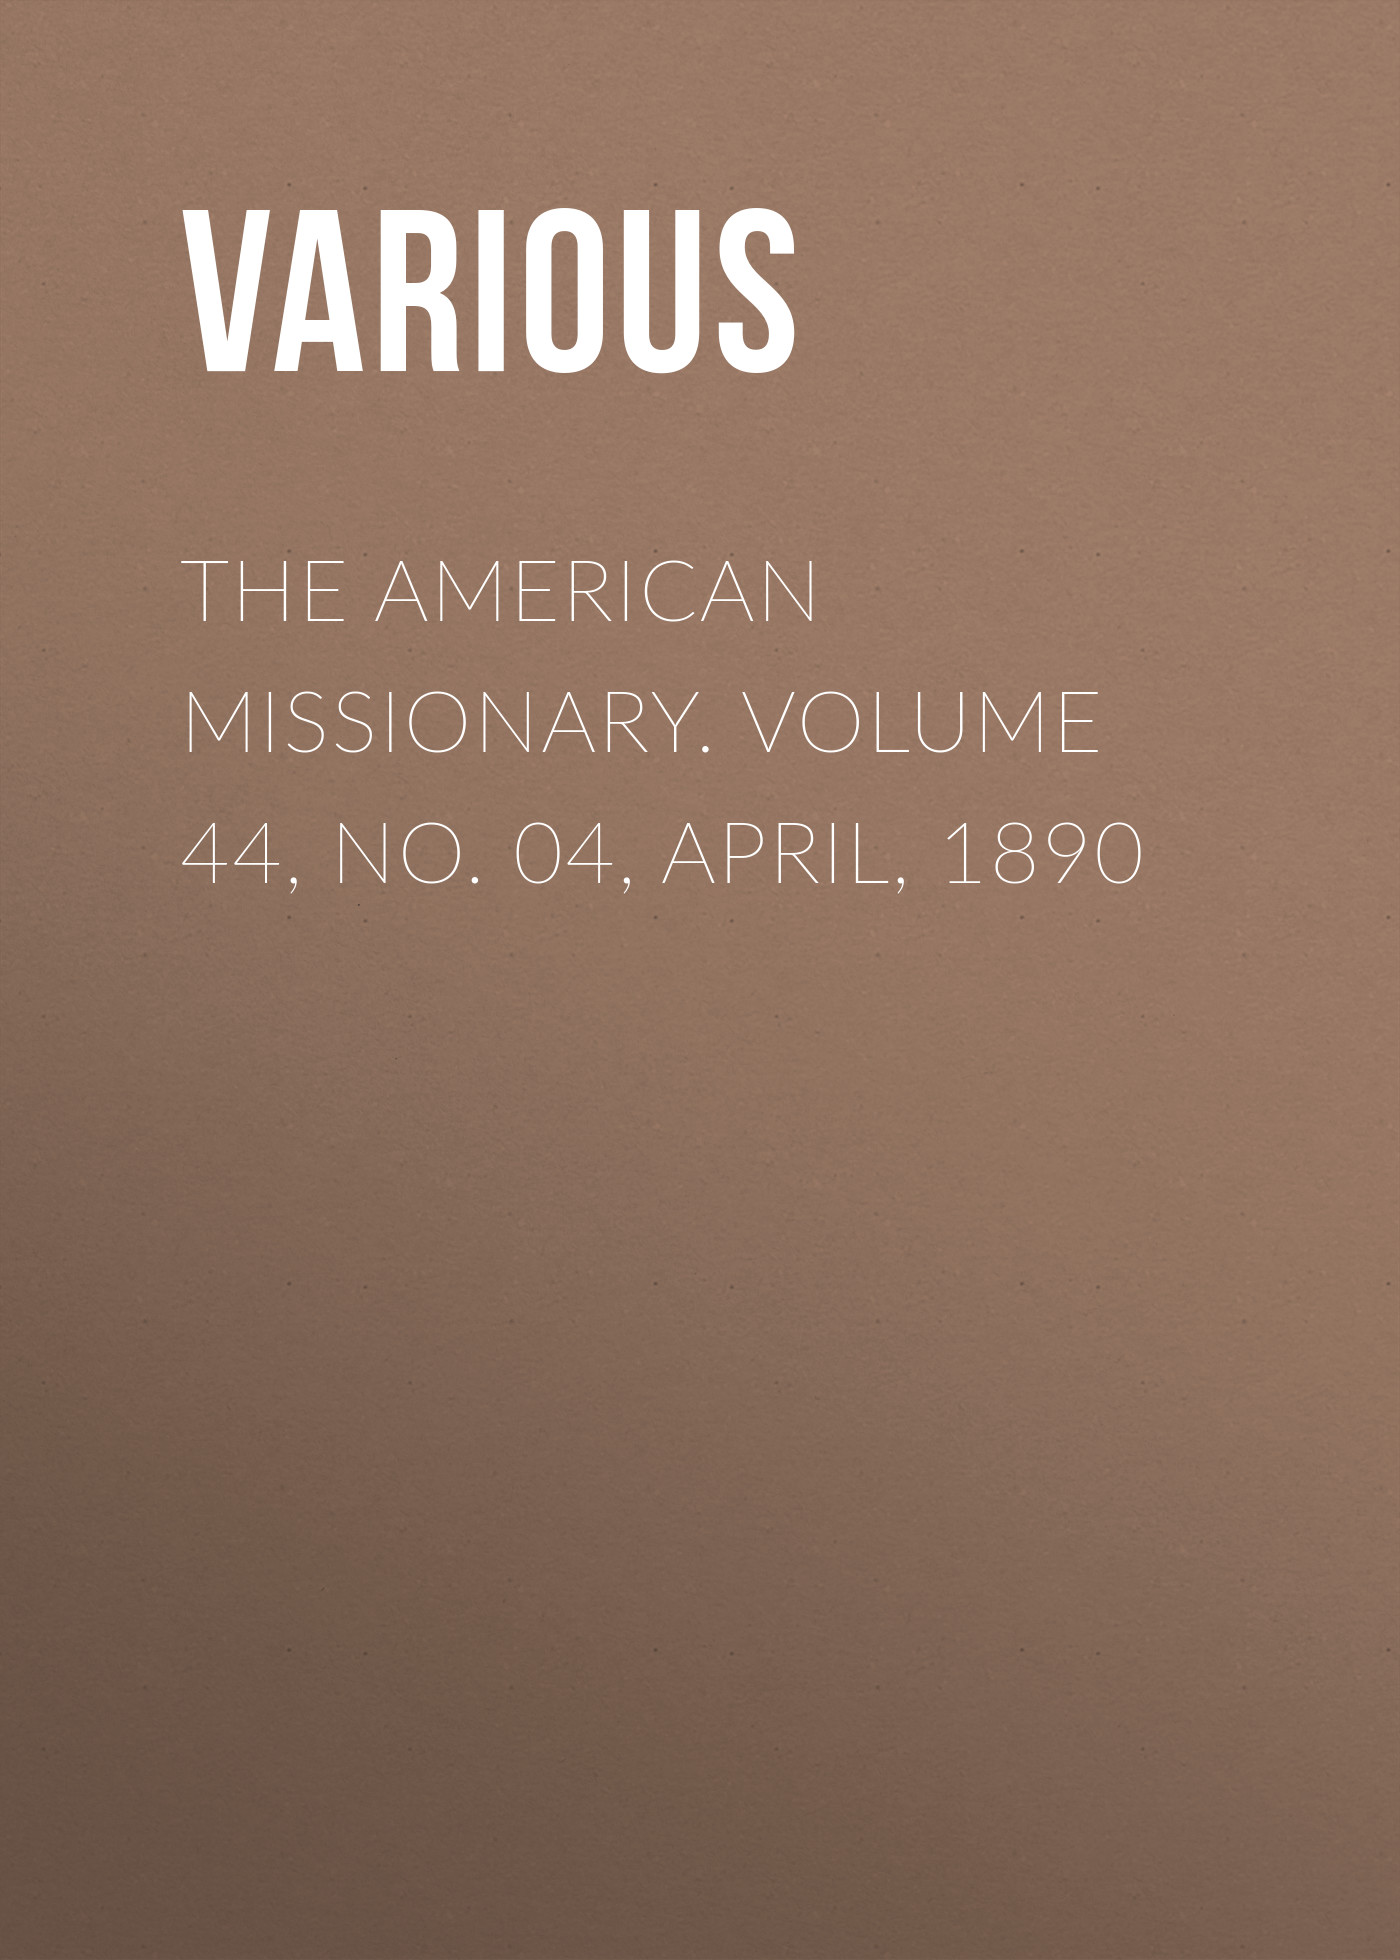 The American Missionary. Volume 44, No. 04, April, 1890